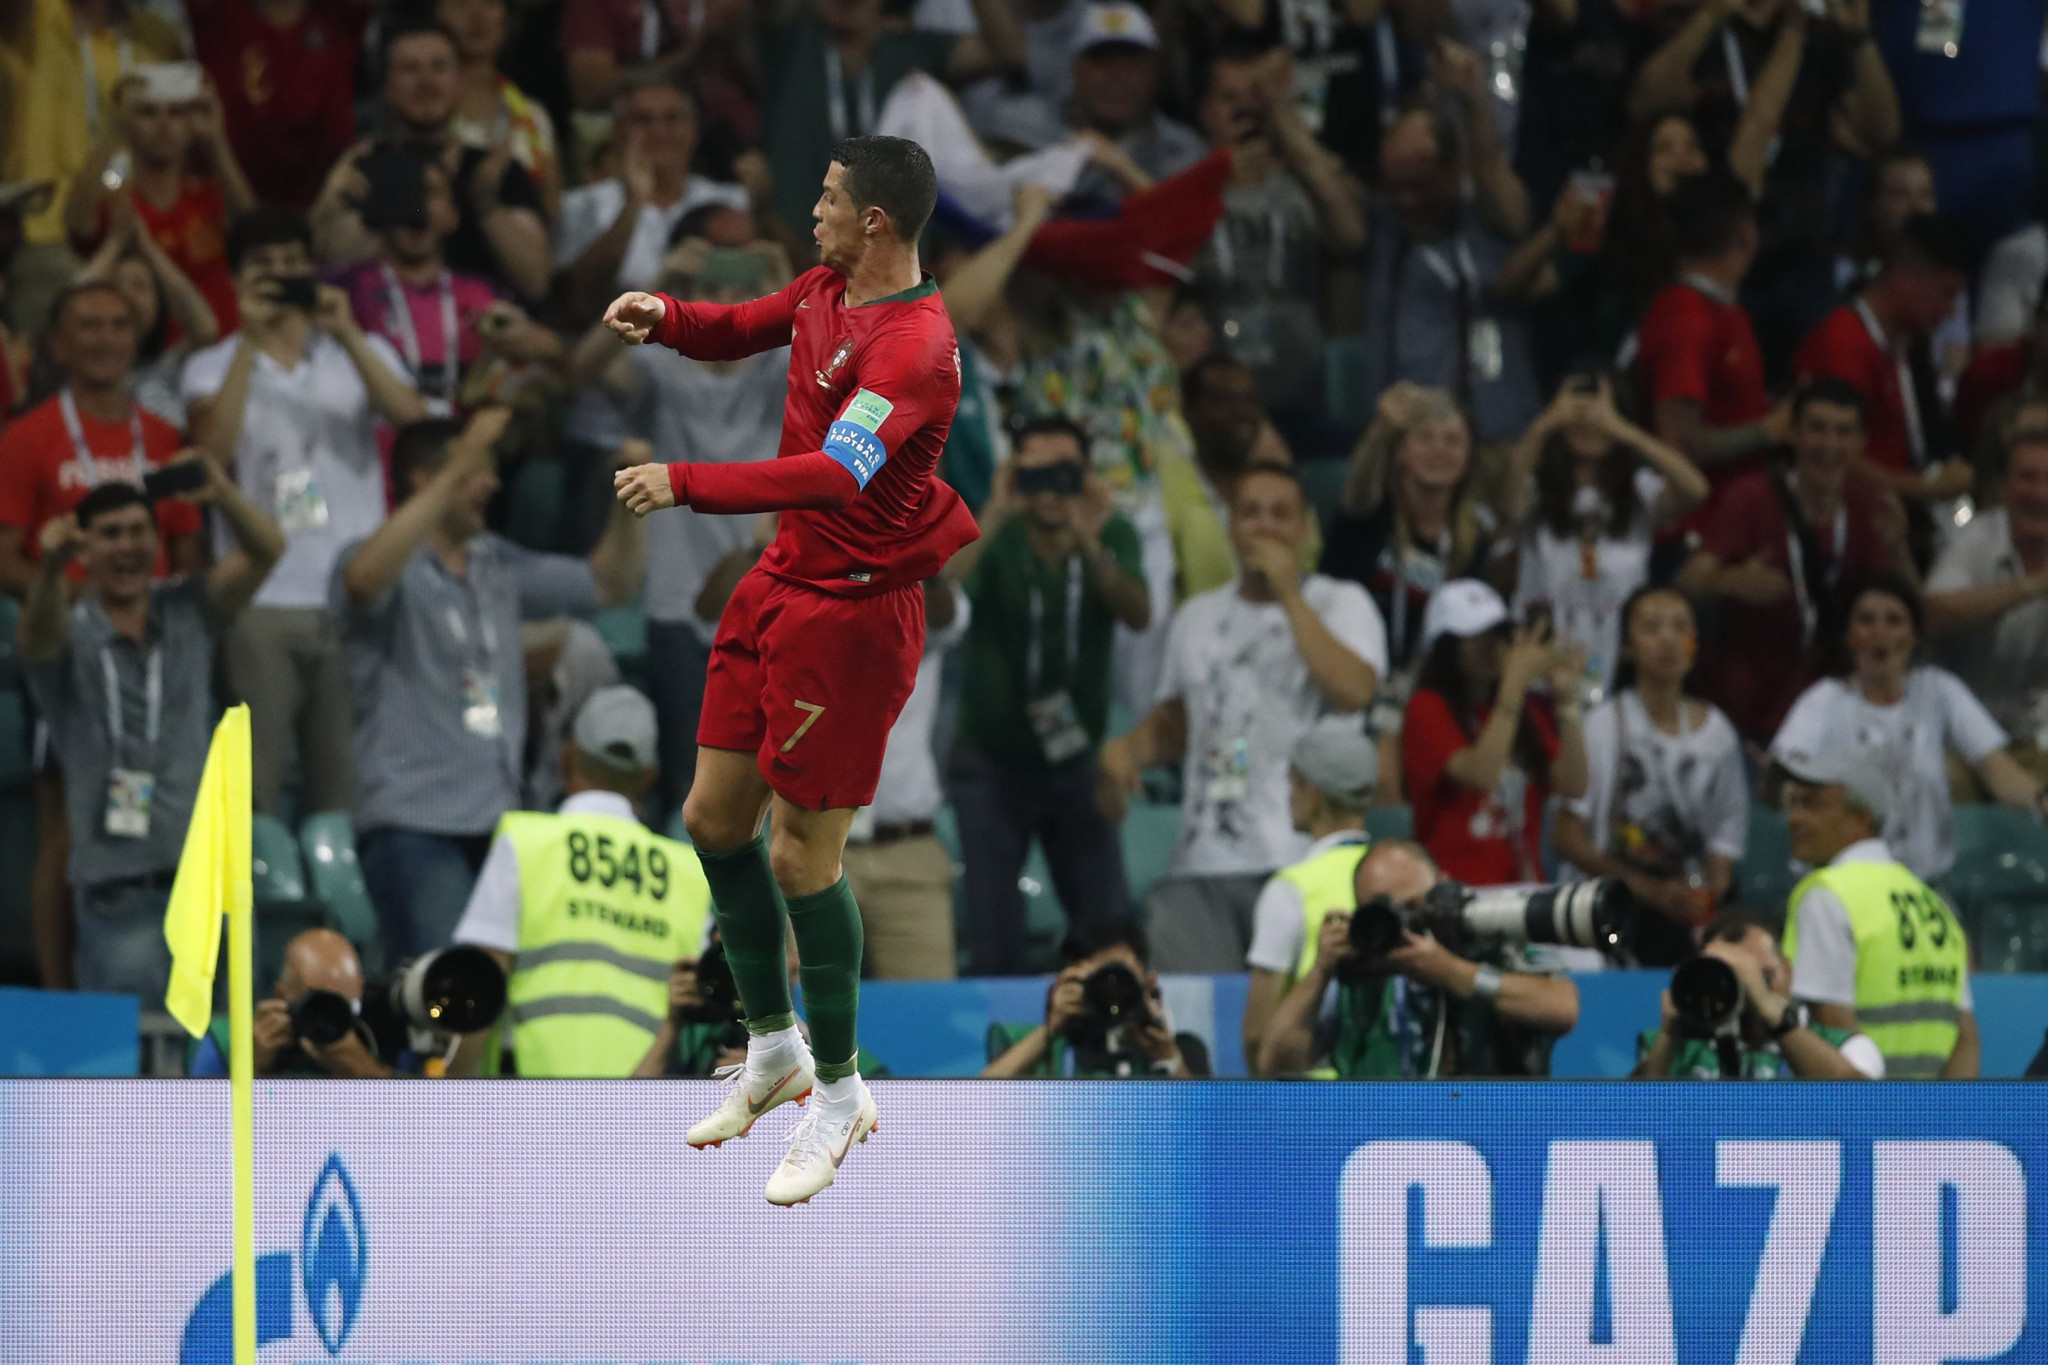 Late goals and hat-tricks as FIFA World Cup continues to excite